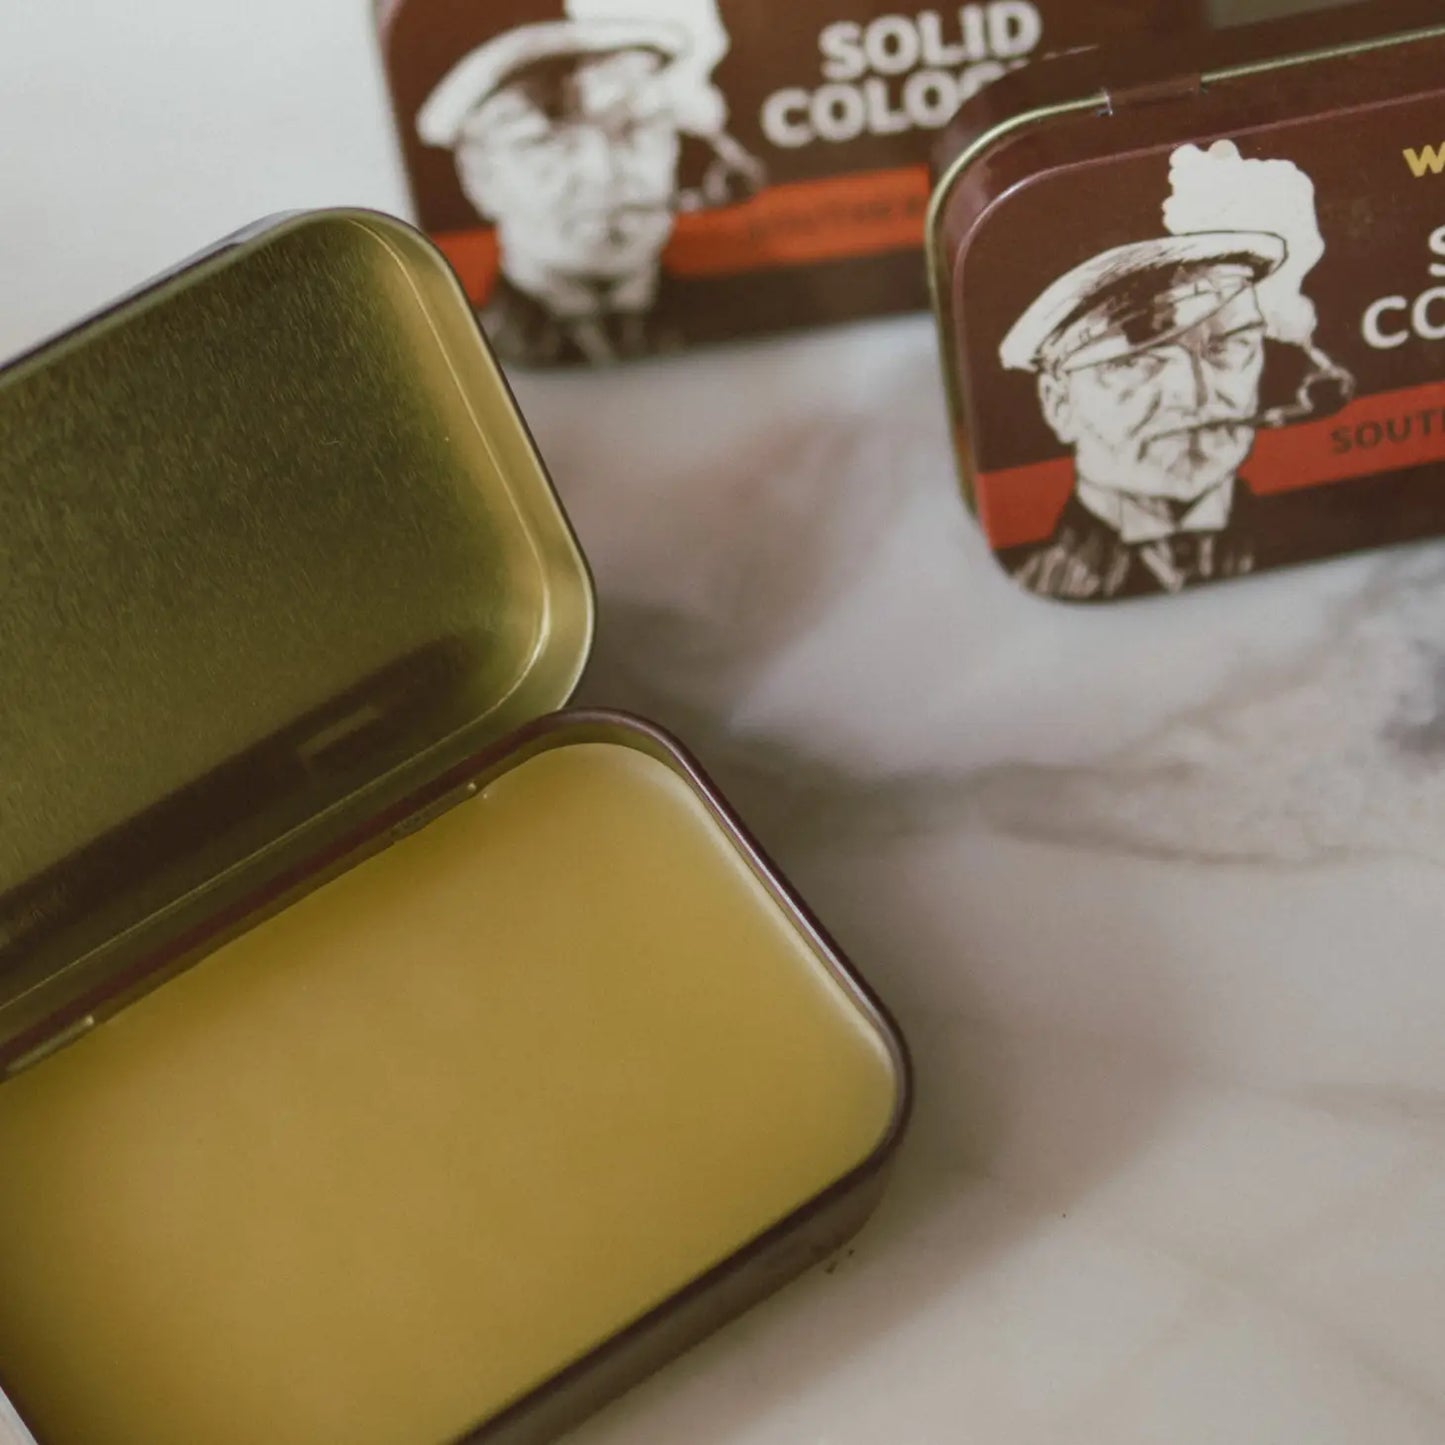 Southern Tobacco ~ Solid Cologne